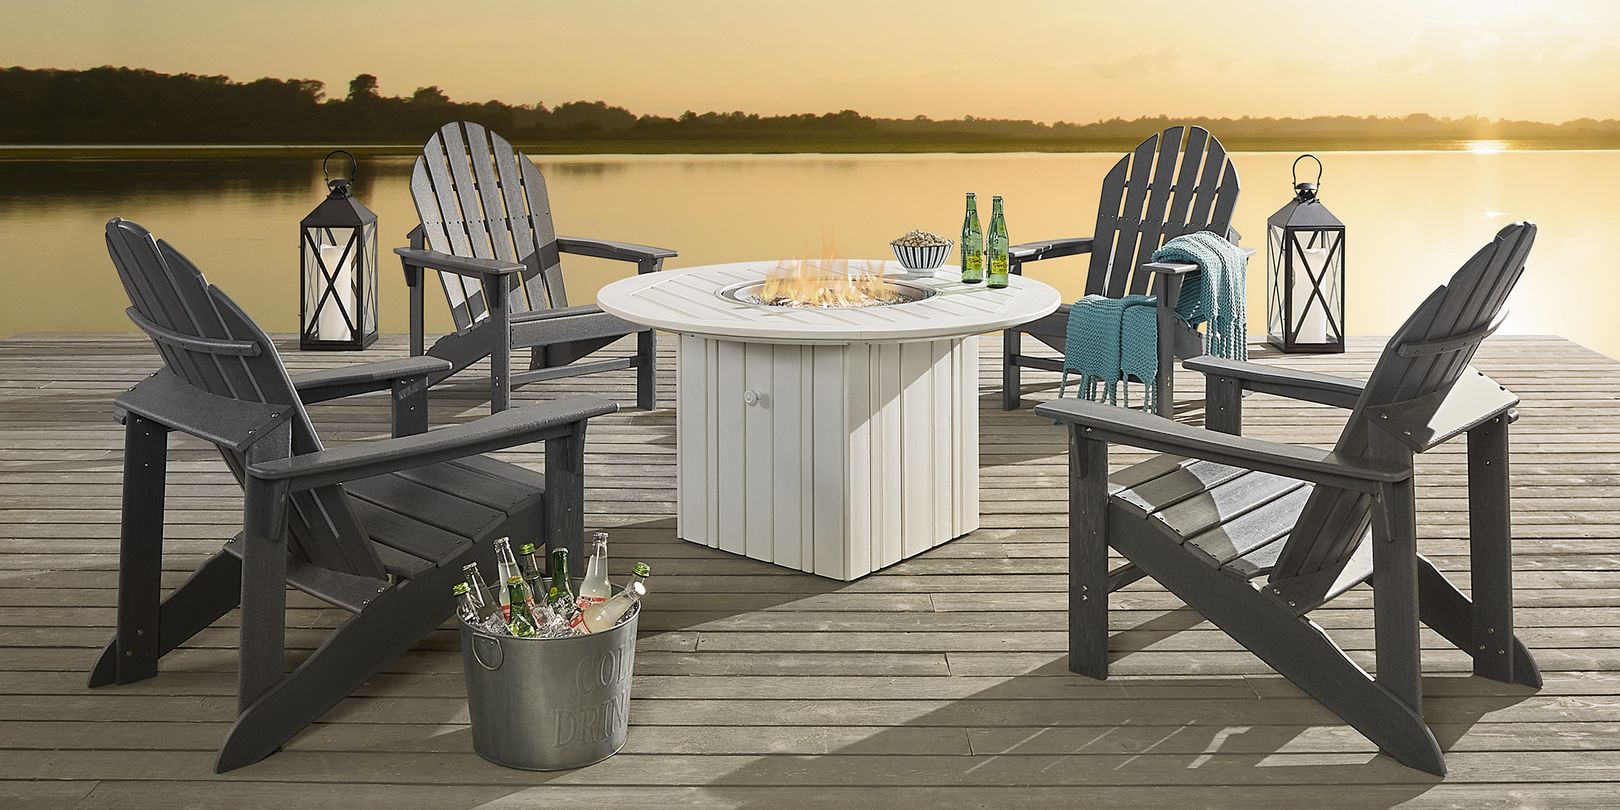 photo of 4 gray Adirondack chairs around  white fire pit table on a deck with lanterns placed at the edges